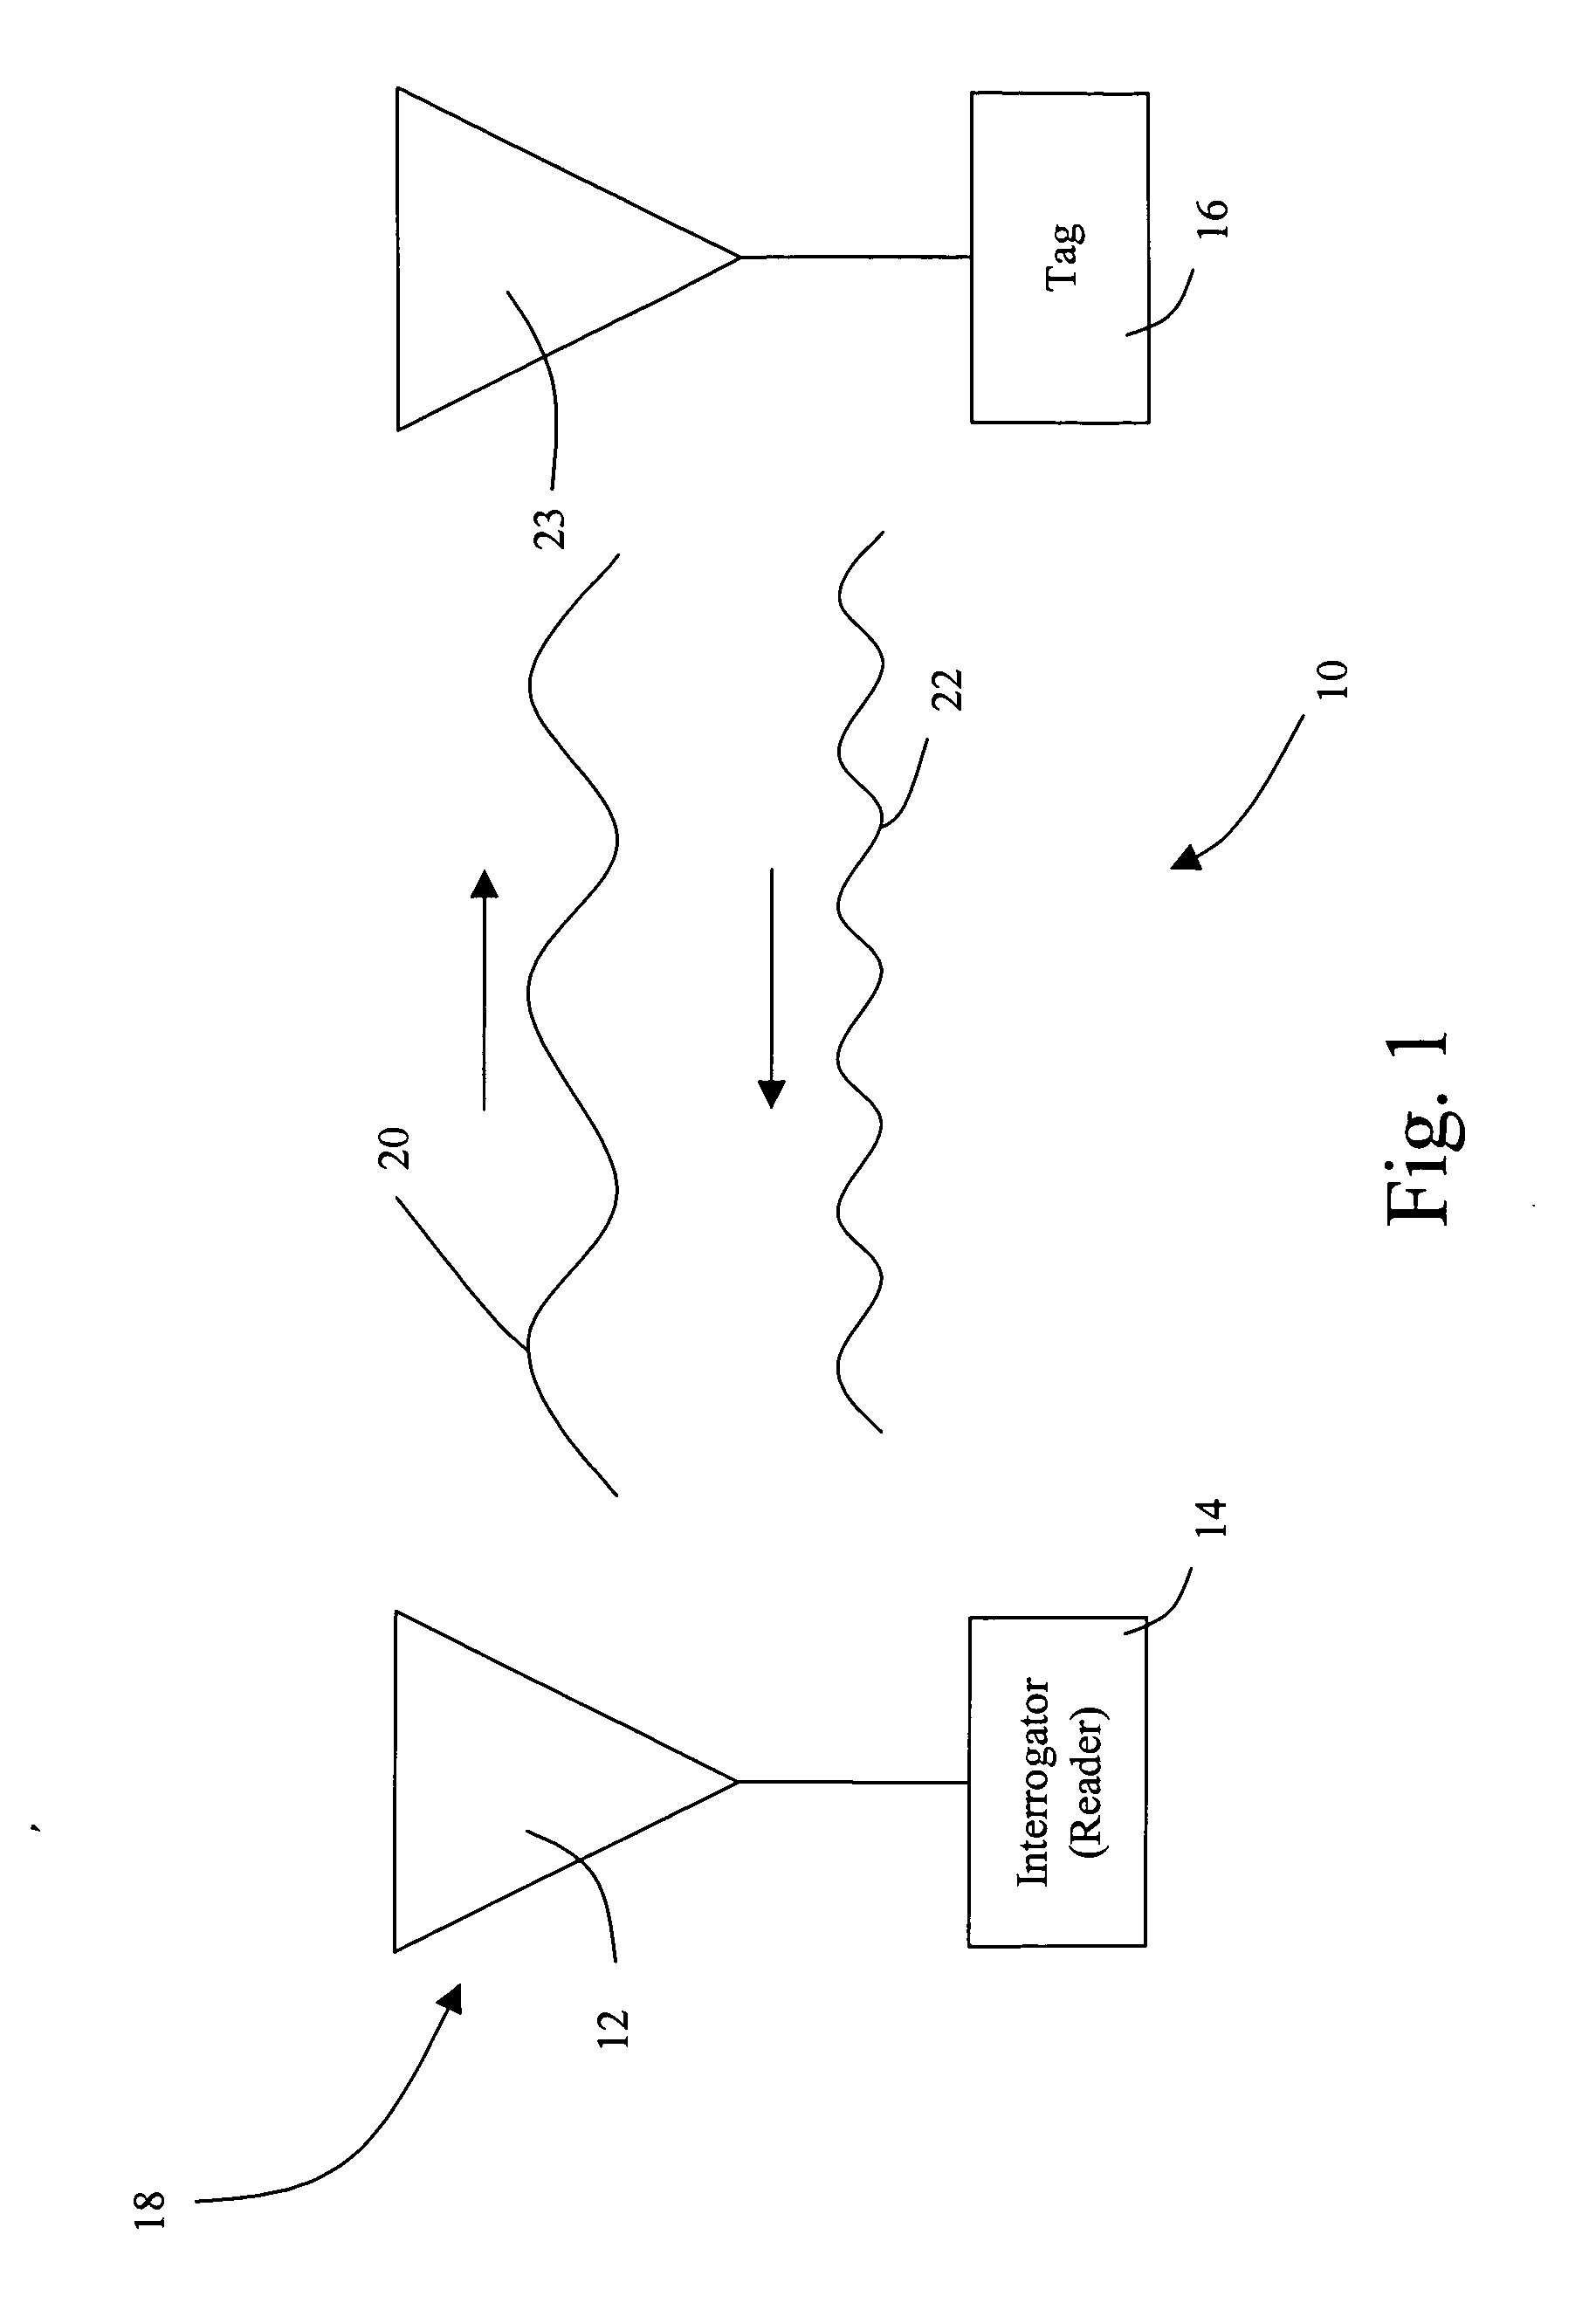 Remote communication device and system for communication